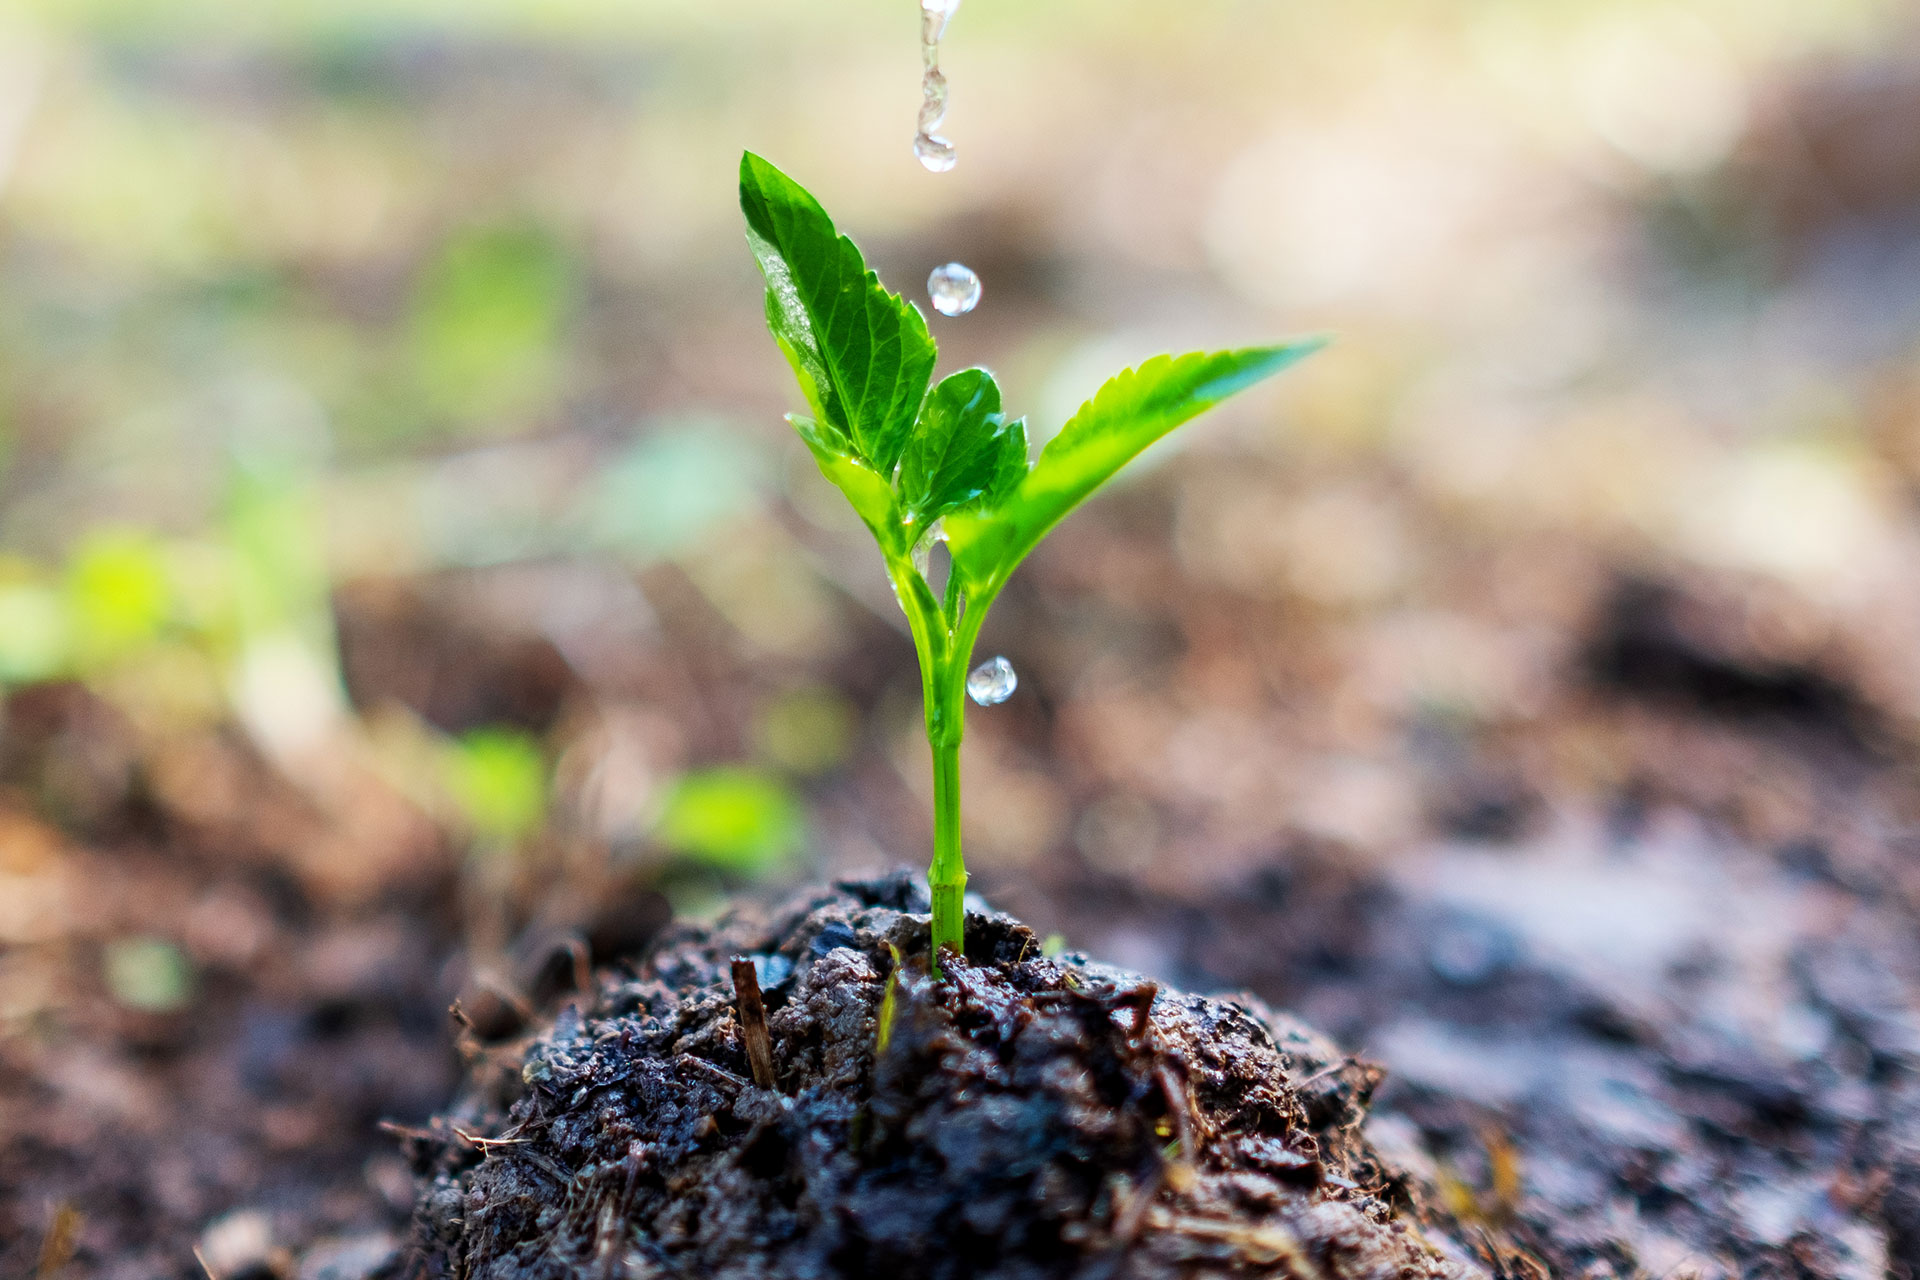 Water Resources, Soil Health & Food